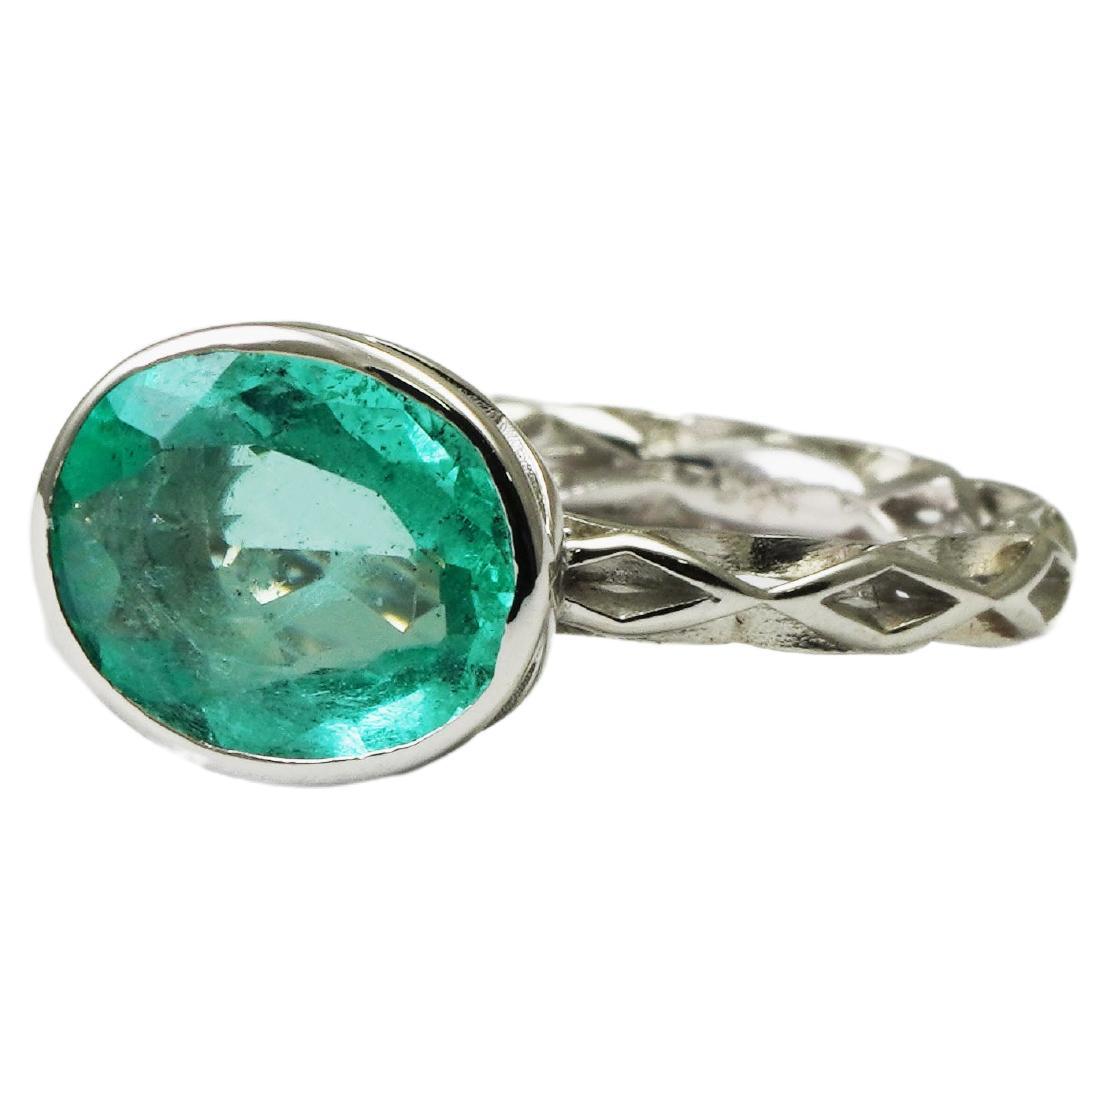 1.83 Carat Colombian Emerald Ring For Sale